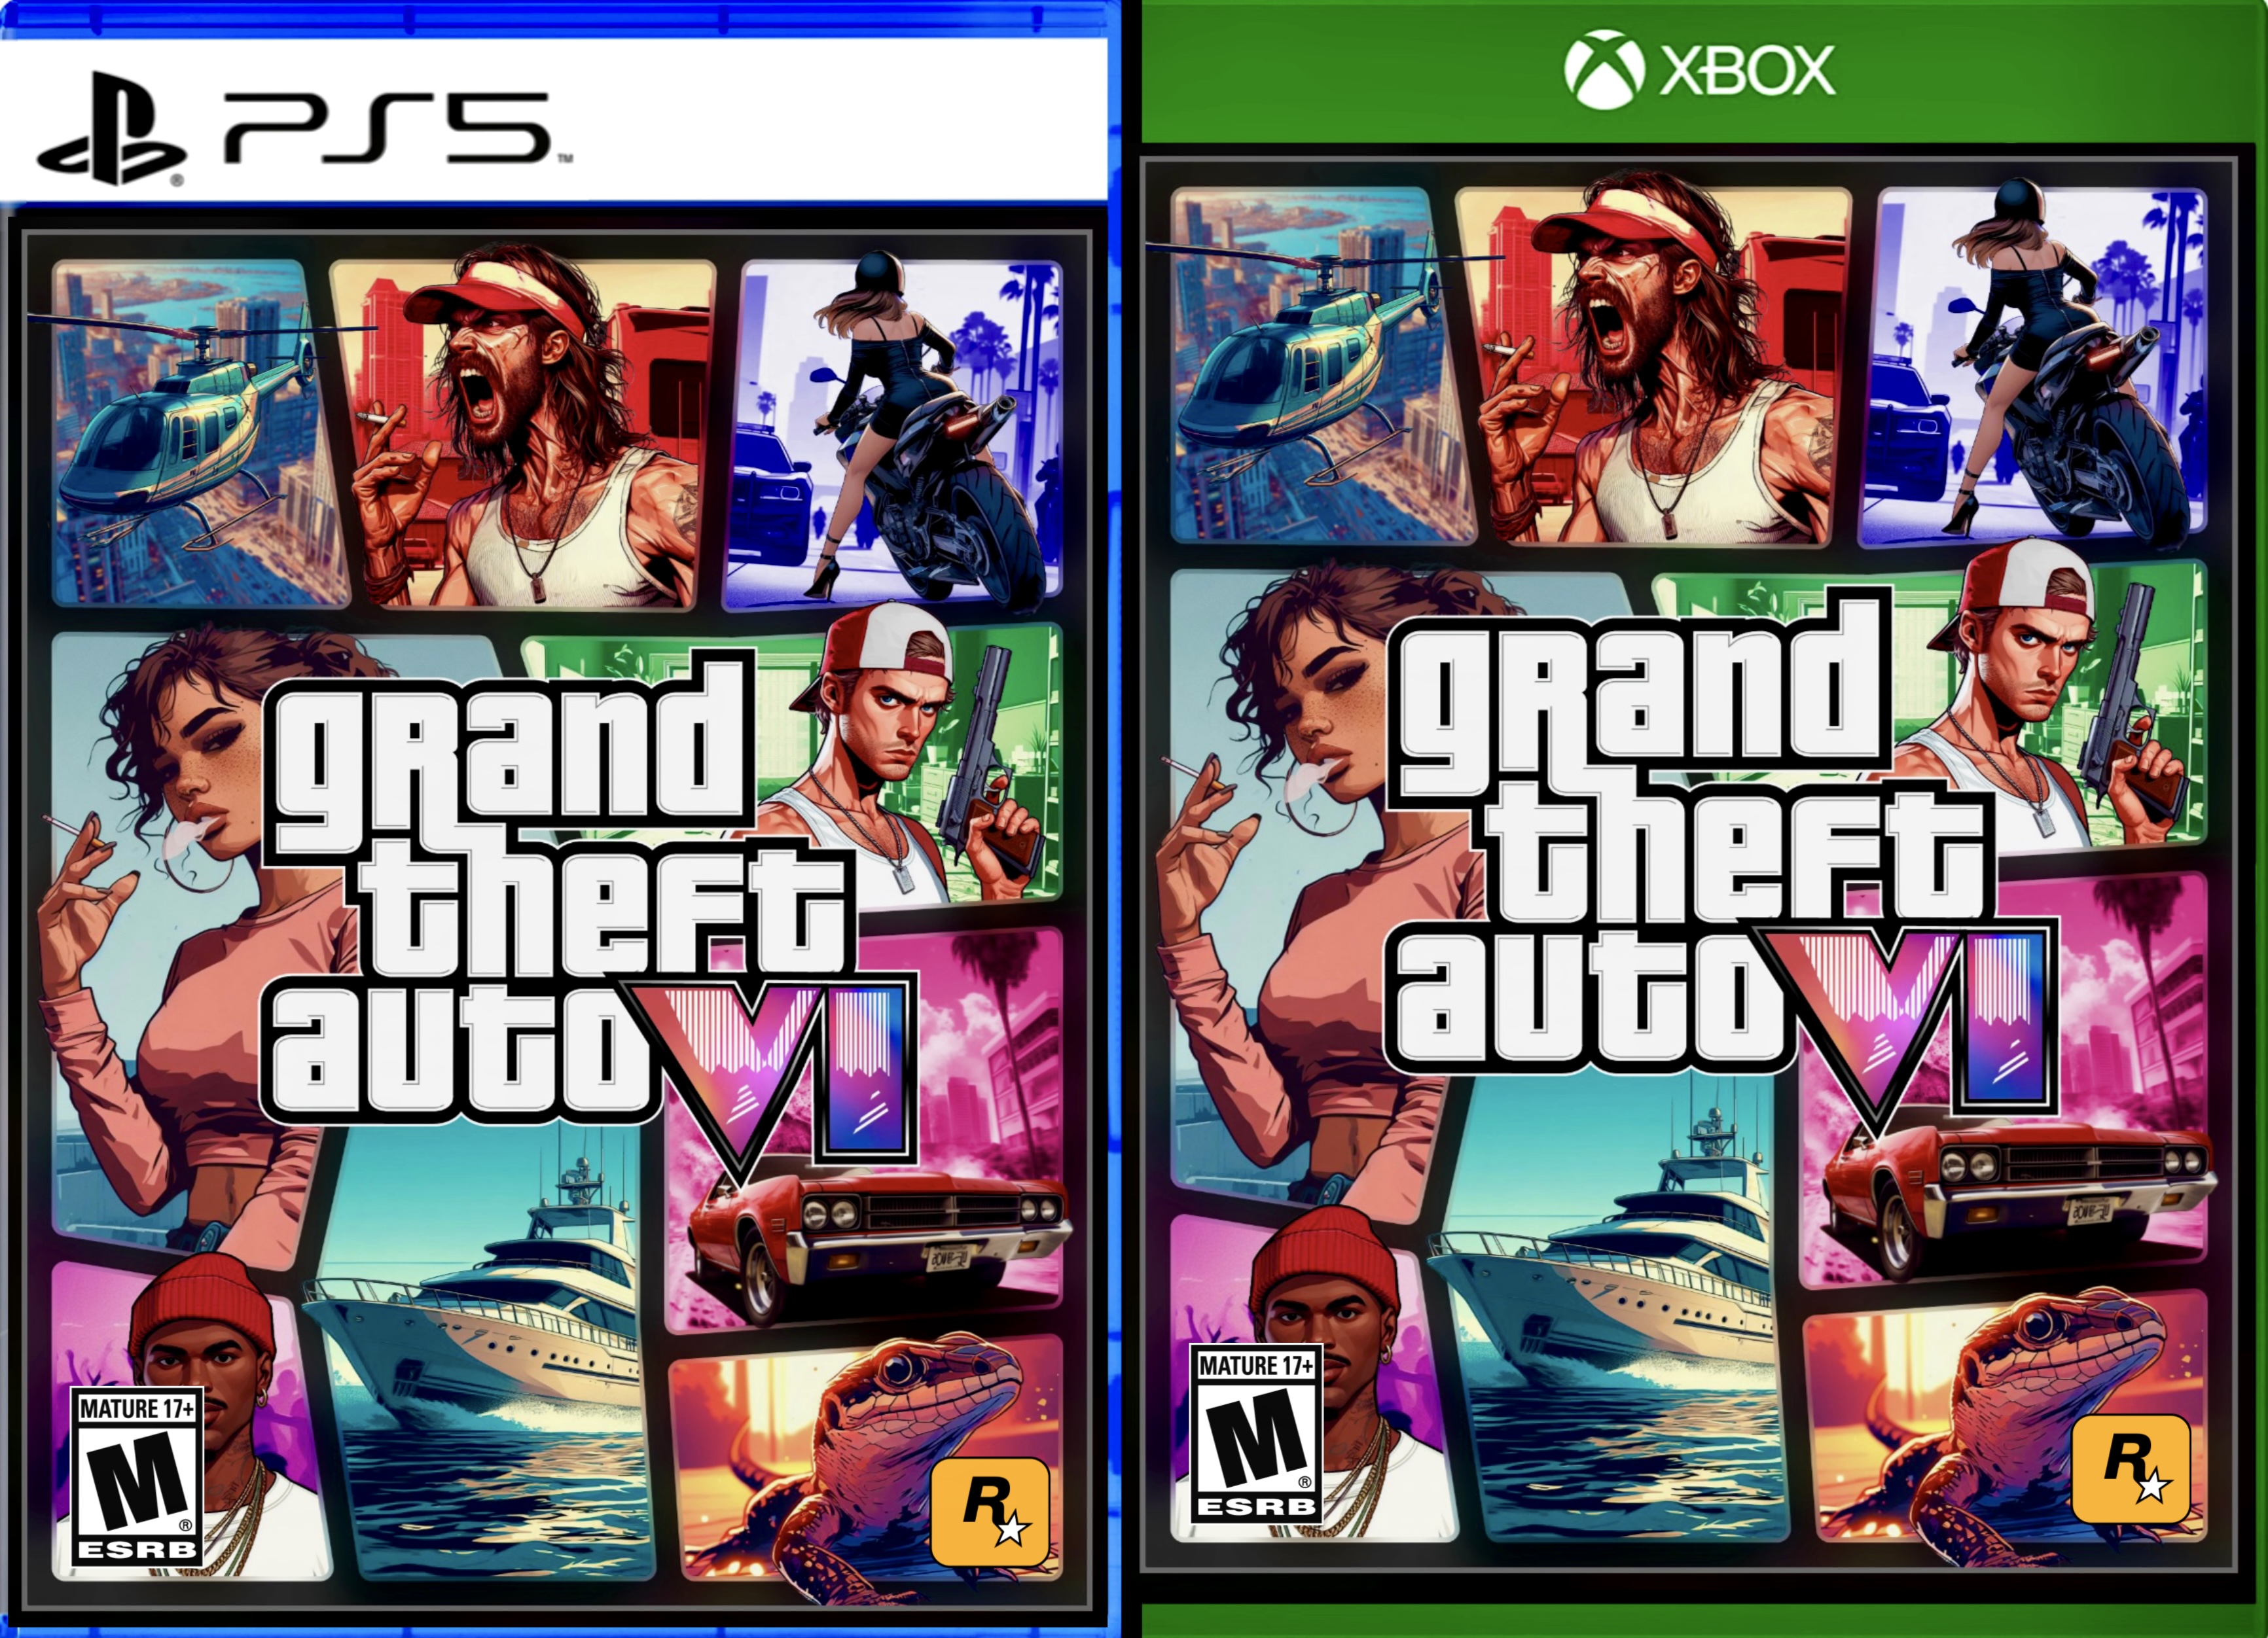 No release on PS5 for GTA 6?